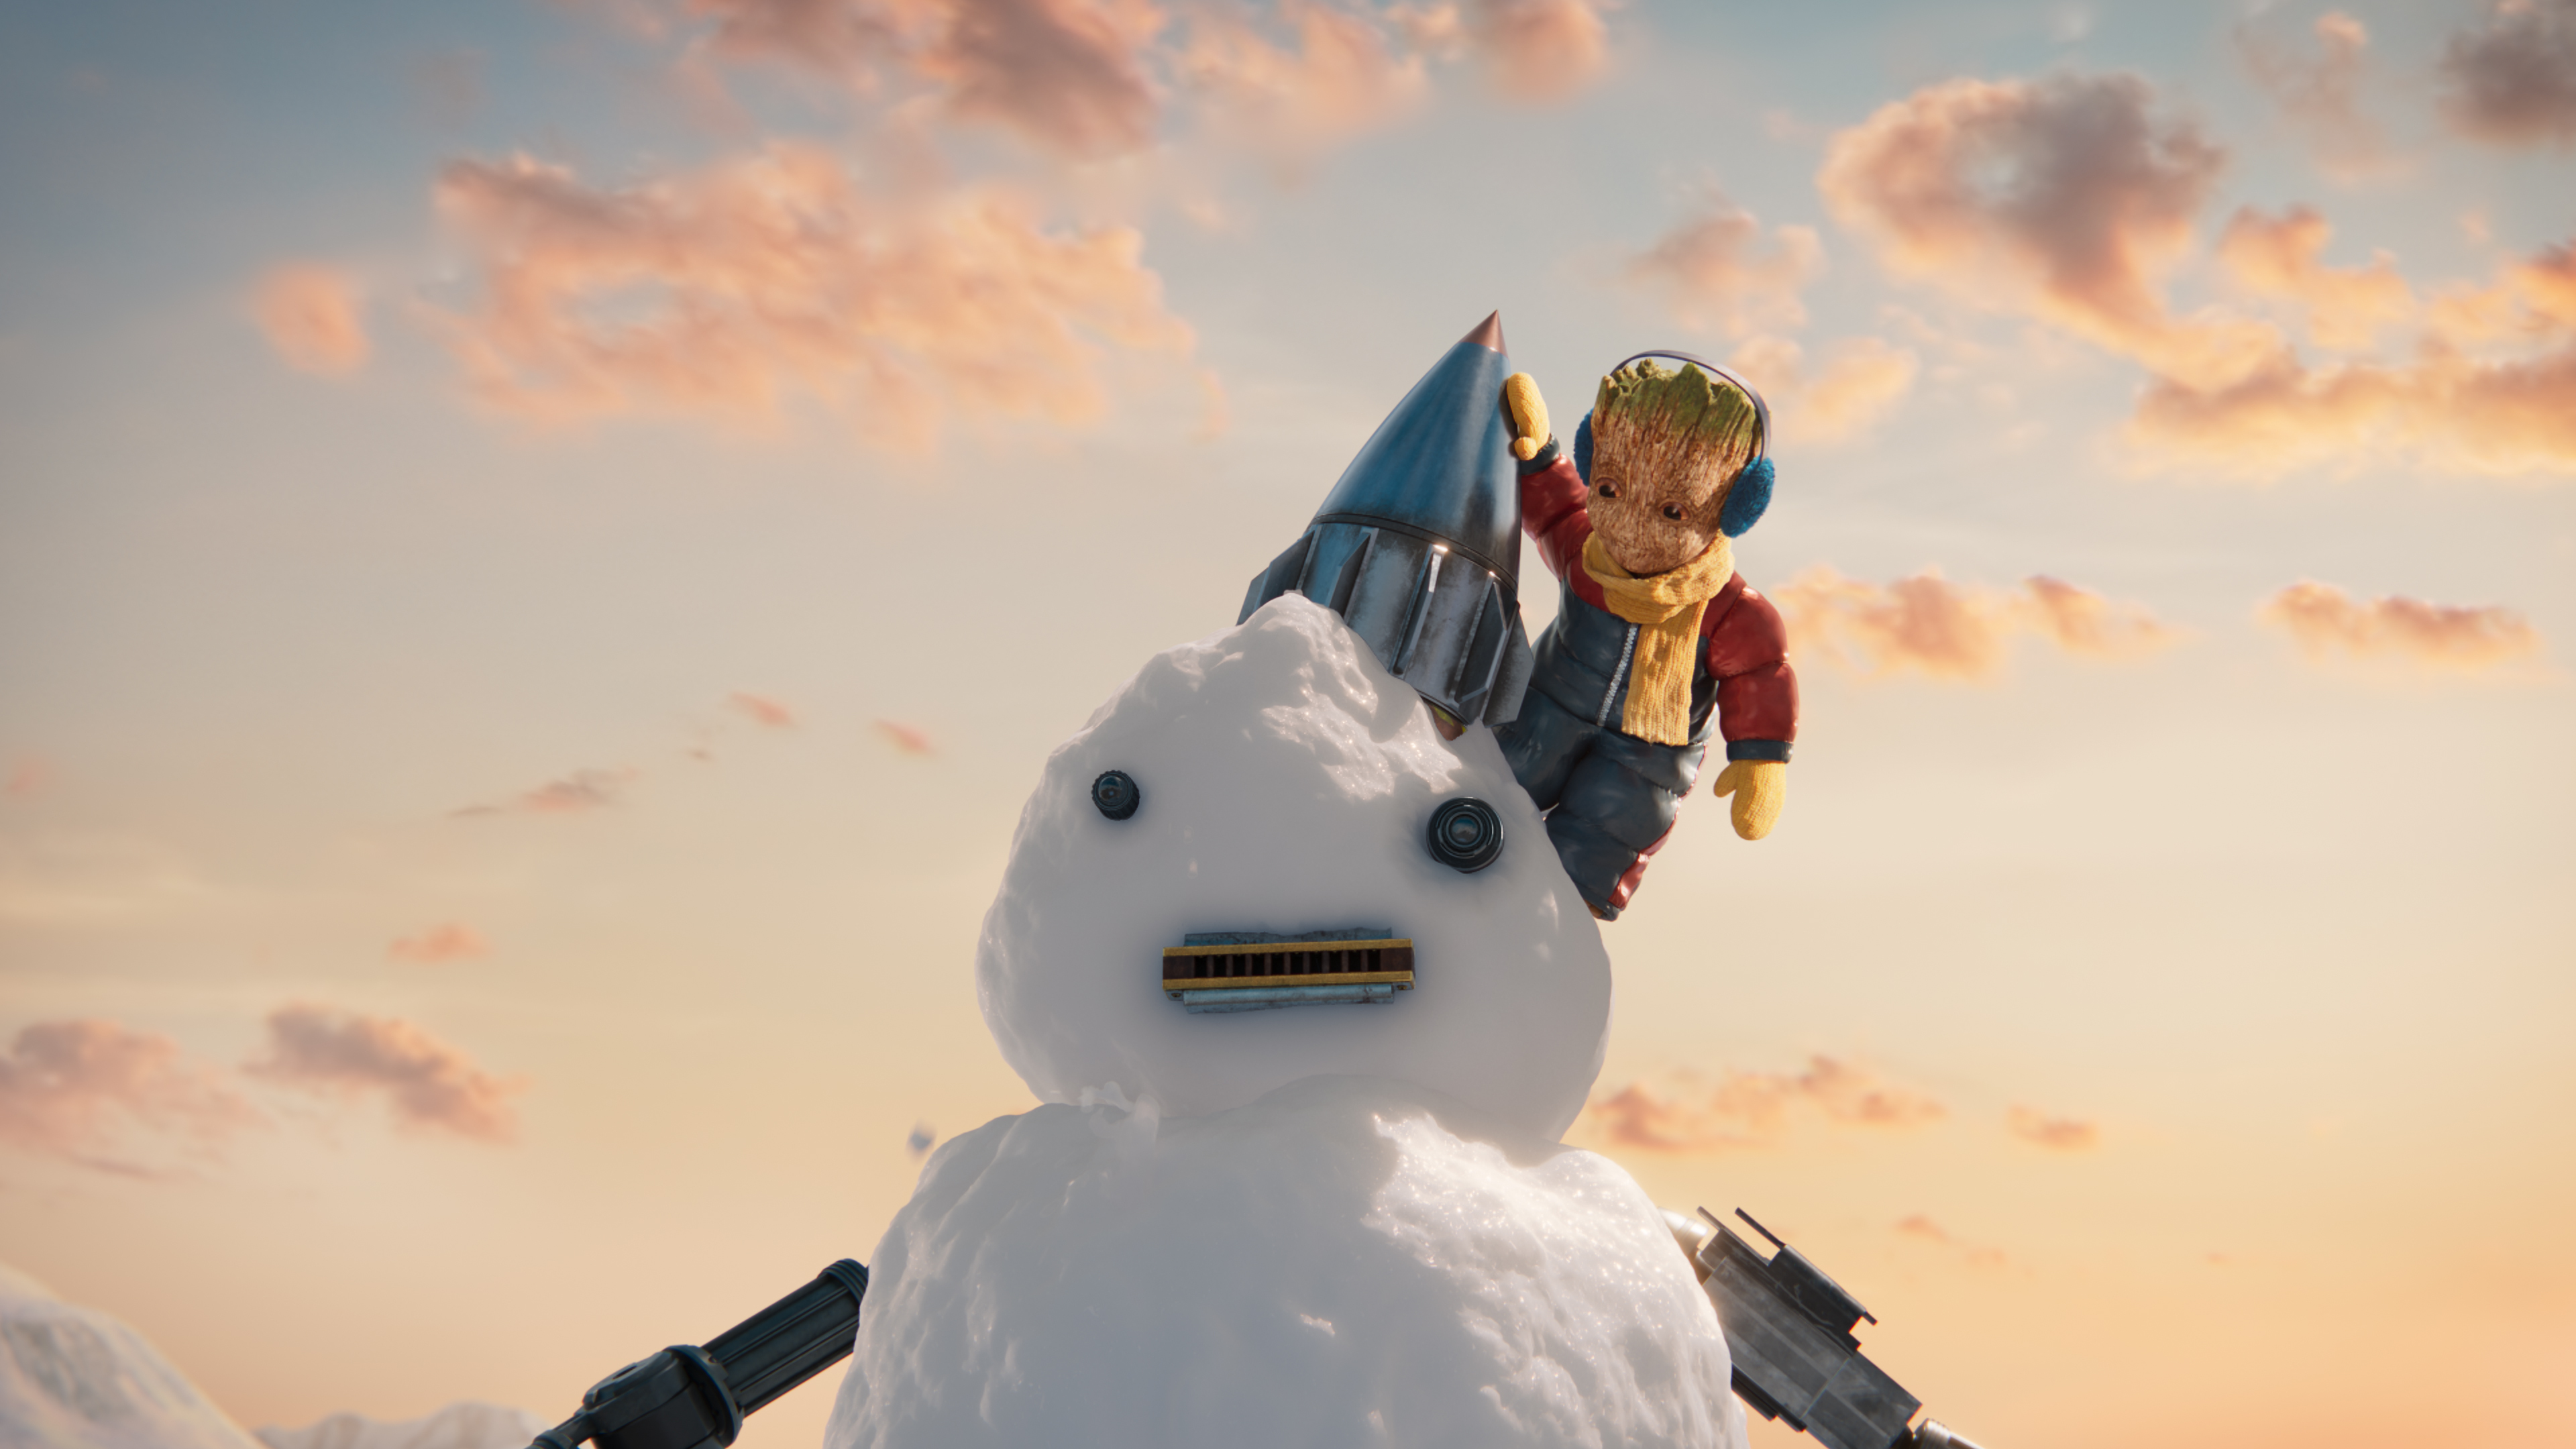 HD wallpaper of Groot character from Guardians of the Galaxy sitting on a snowman against a cloud-filled sky background.